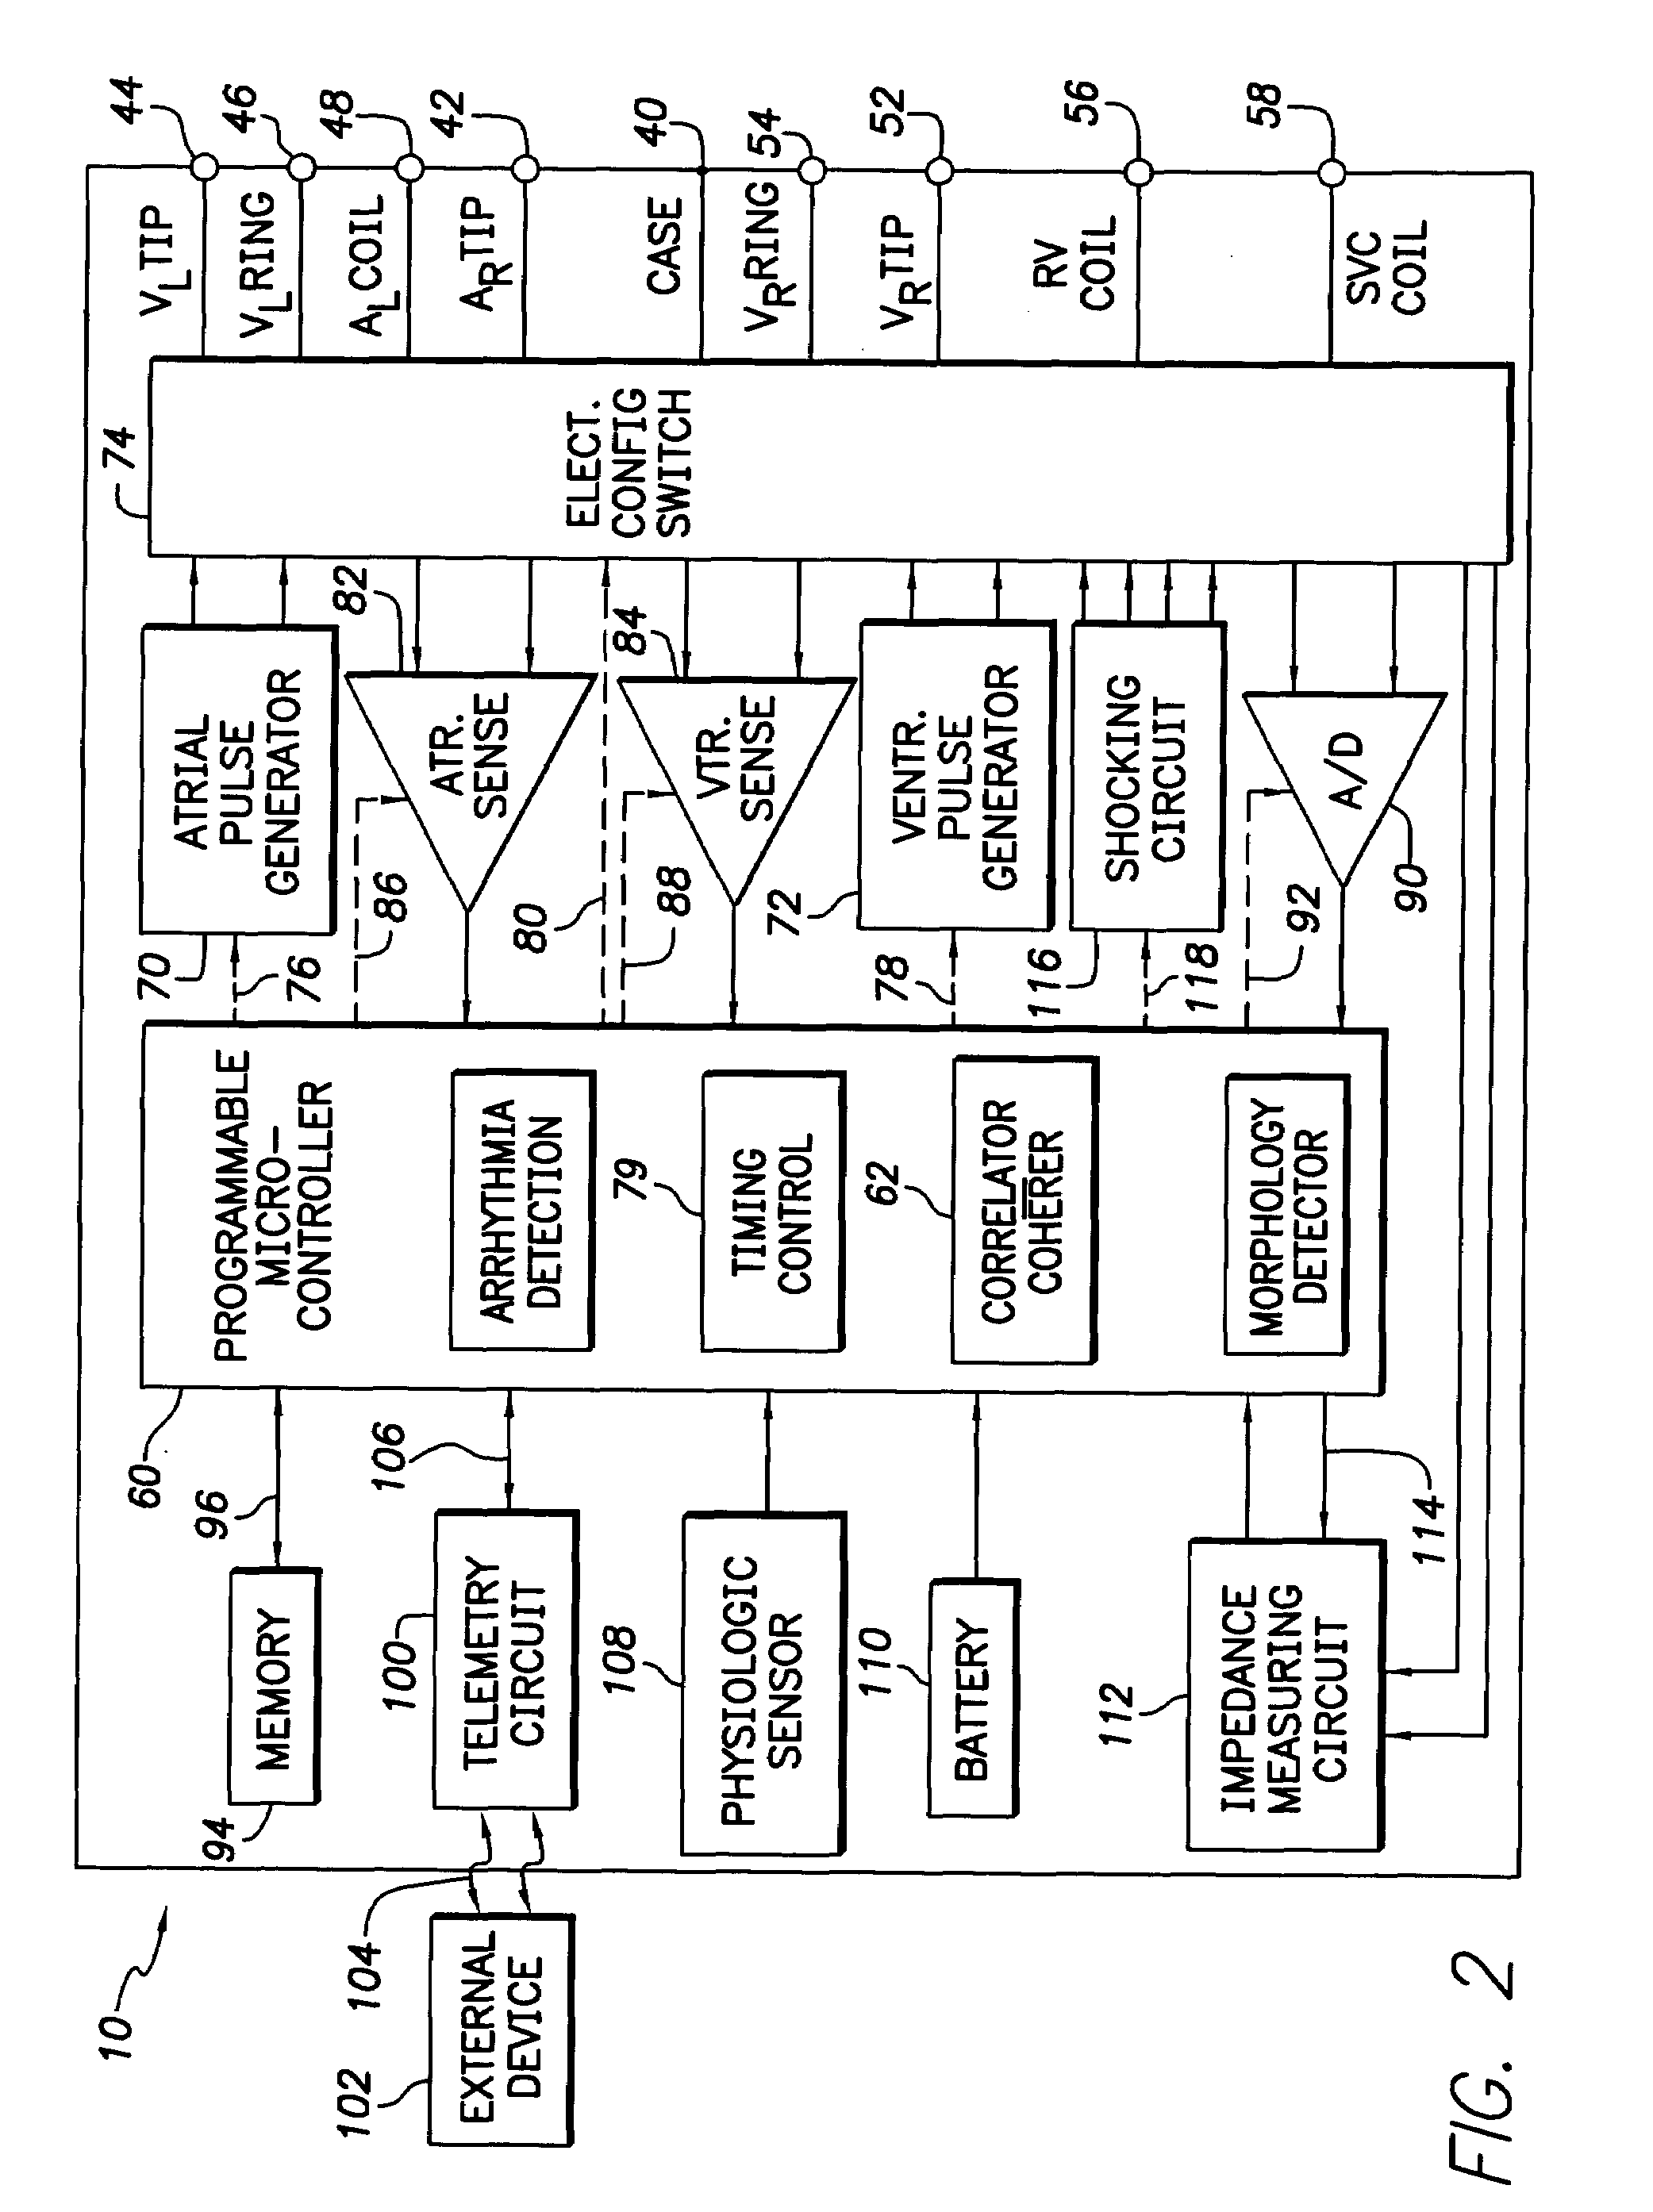 Implantable cardiac stimulation device providing accelerated defibrillation delivery and method